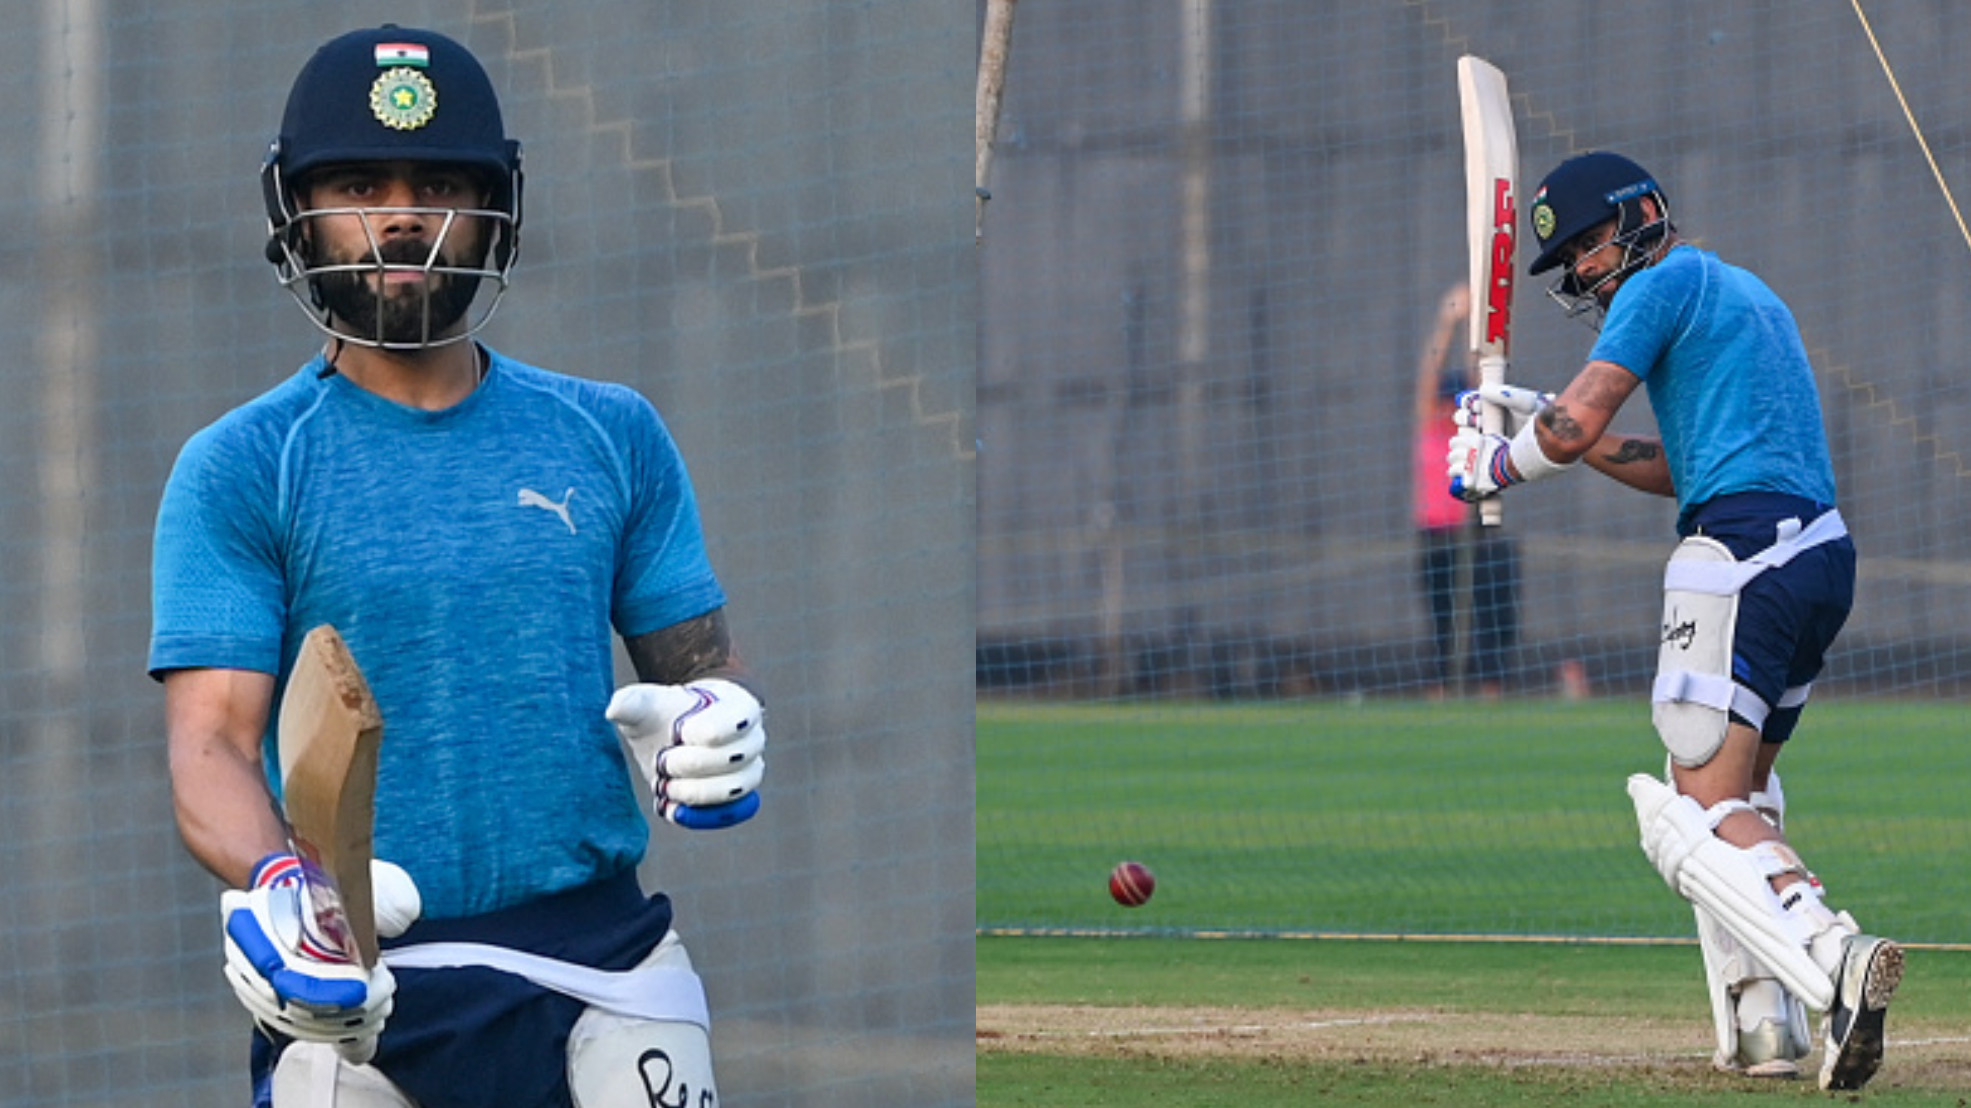 IND v NZ 2021: PICS- Virat Kohli sweats it out in nets at Brabourne Stadium to prepare for second Test